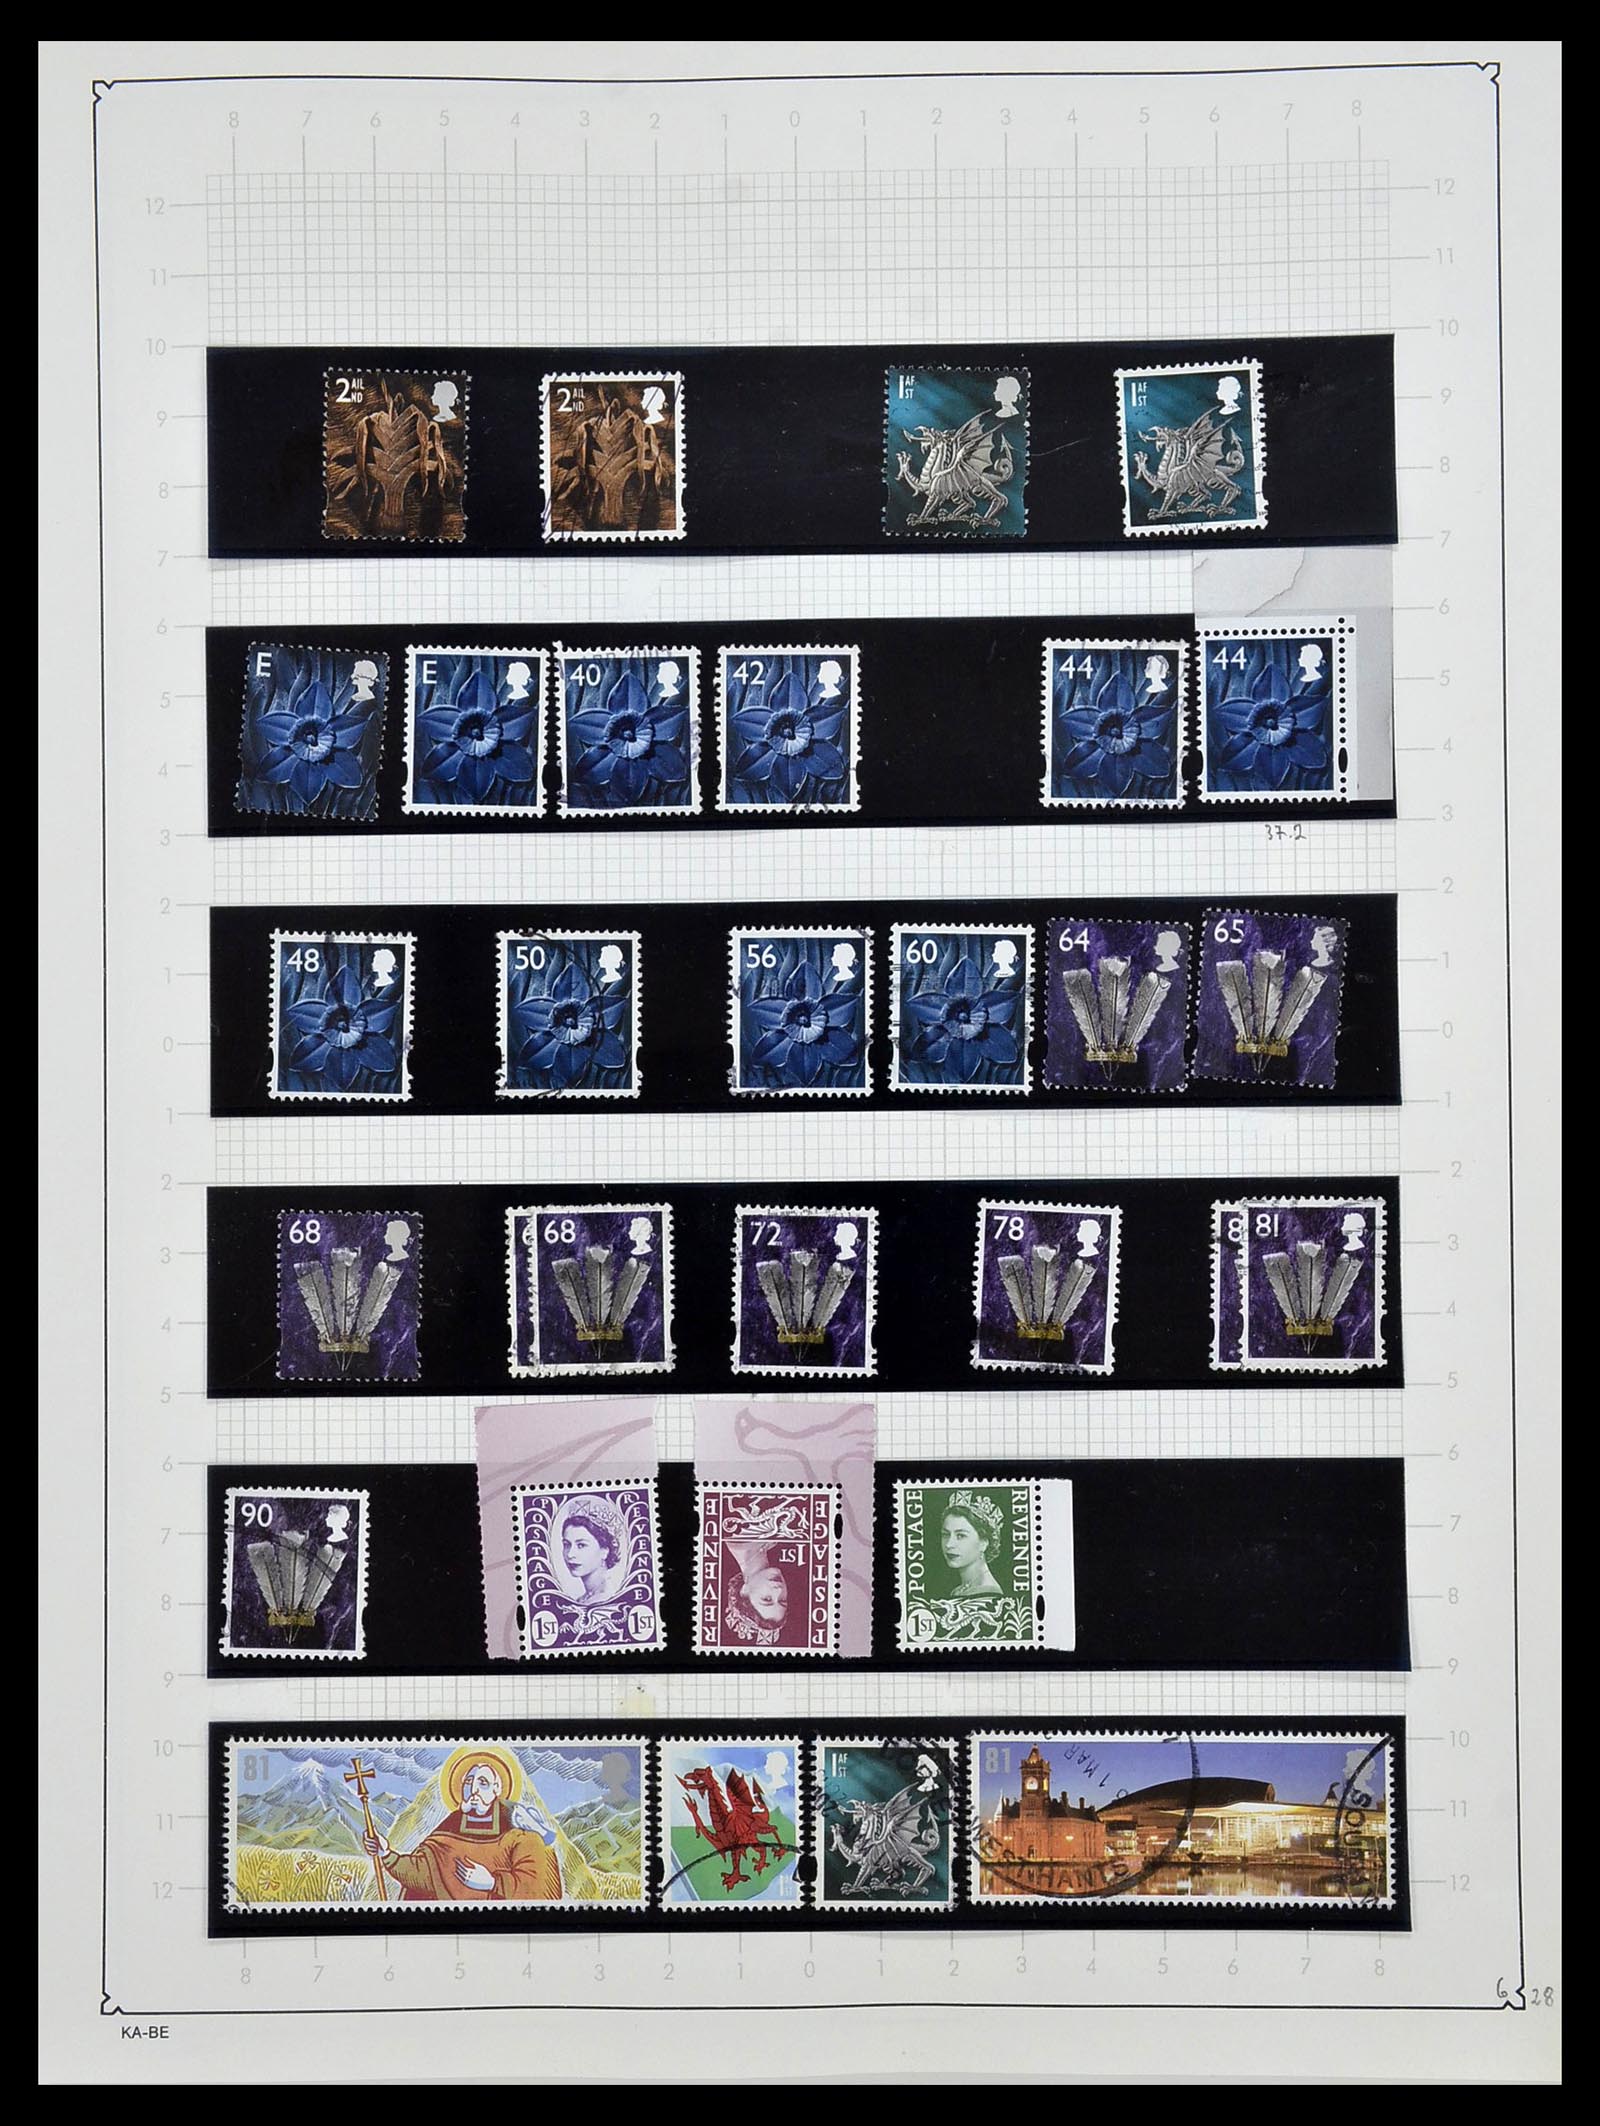 34221 036 - Stamp collection 34221 Great Britain Machins/castles 1971-2005.